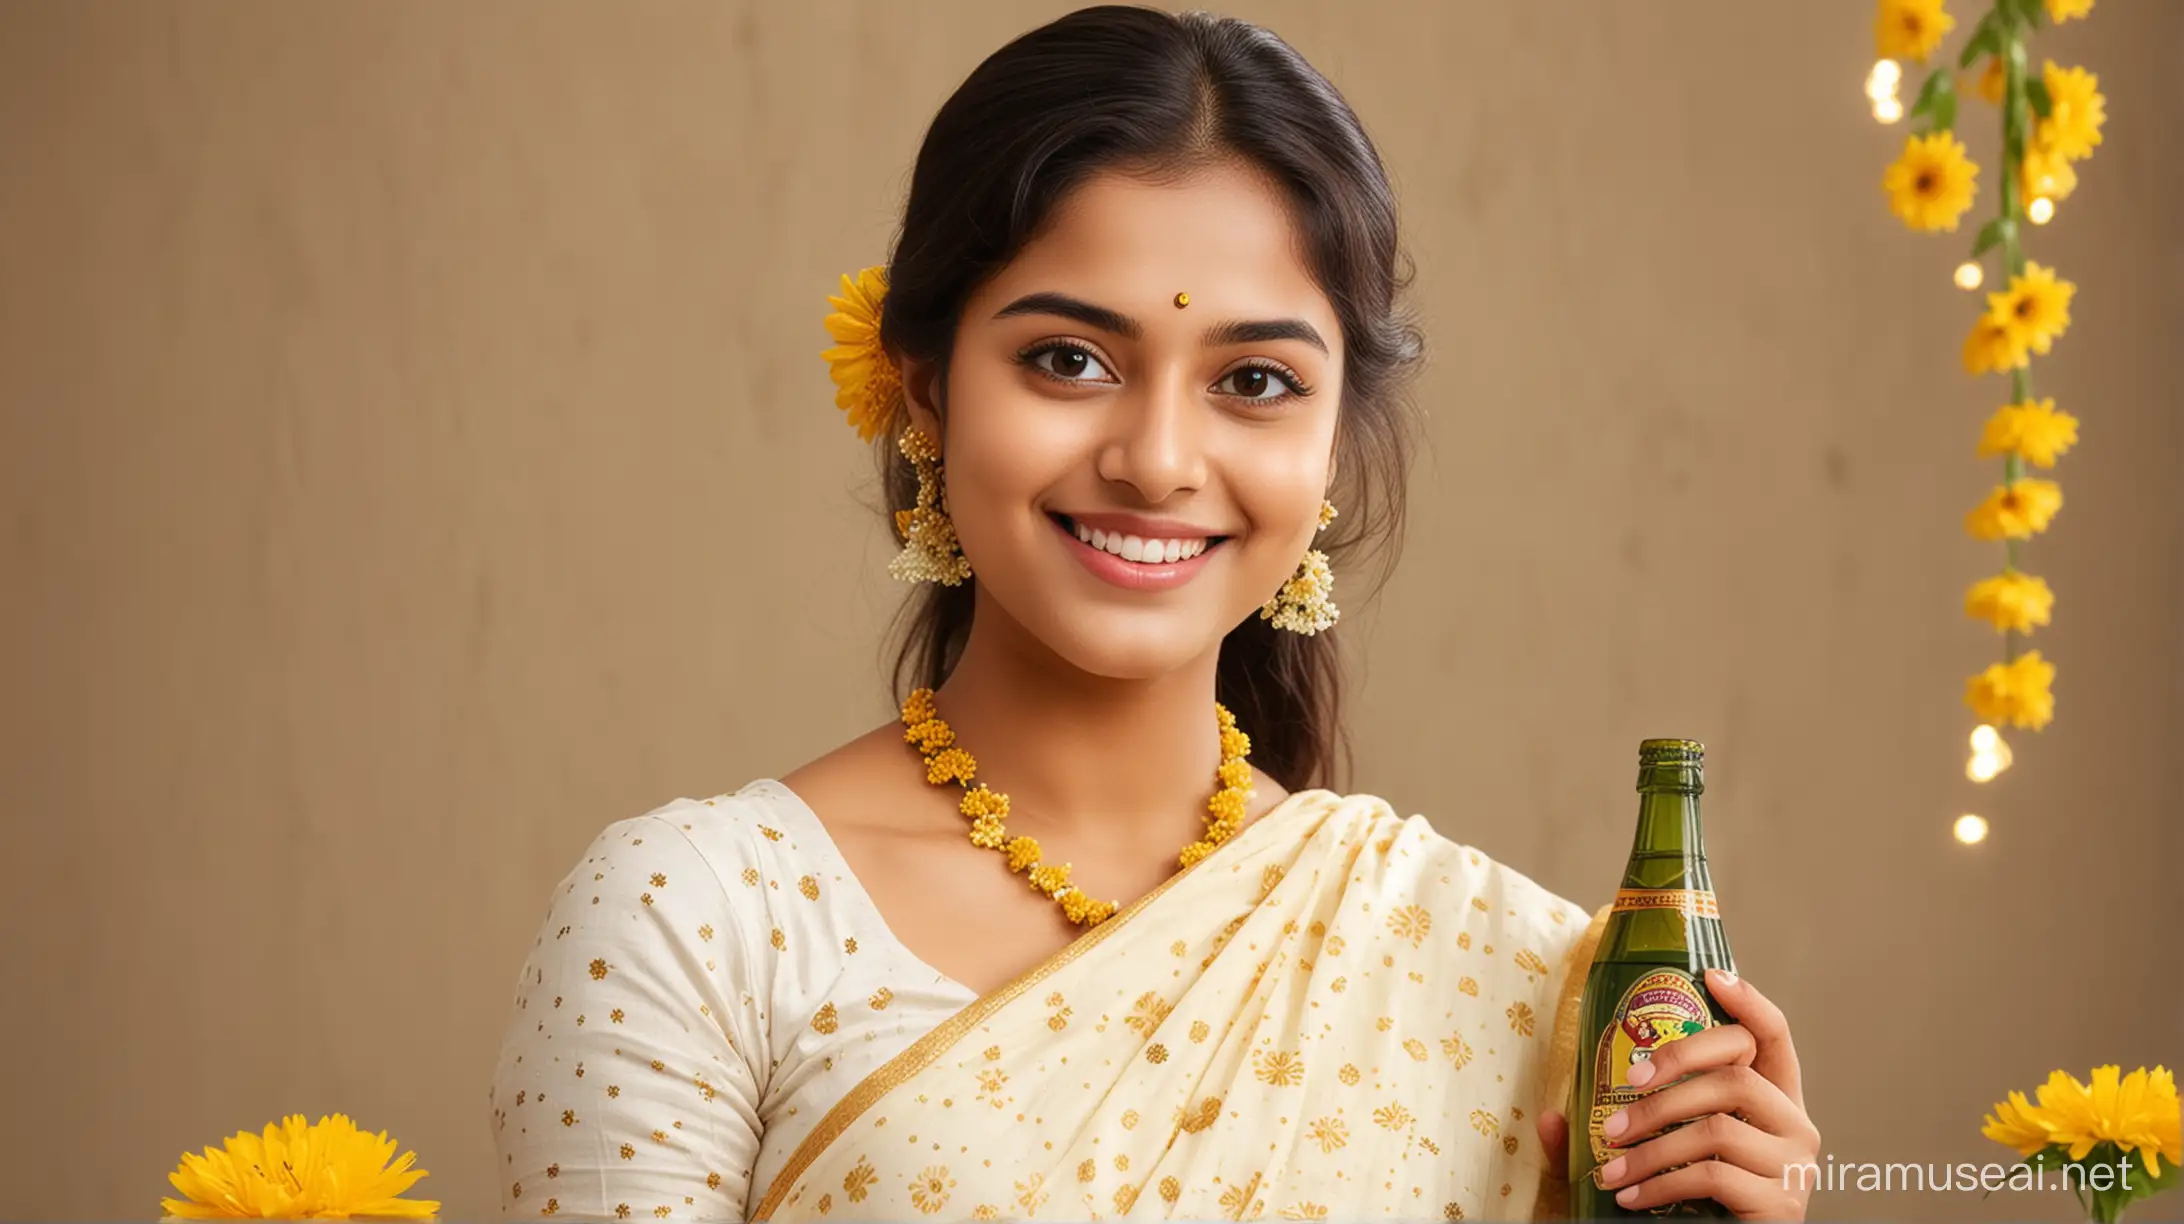 Beautiful Kerala Girl Holding Bottle in Traditional Saree with Sparkling Floral Background